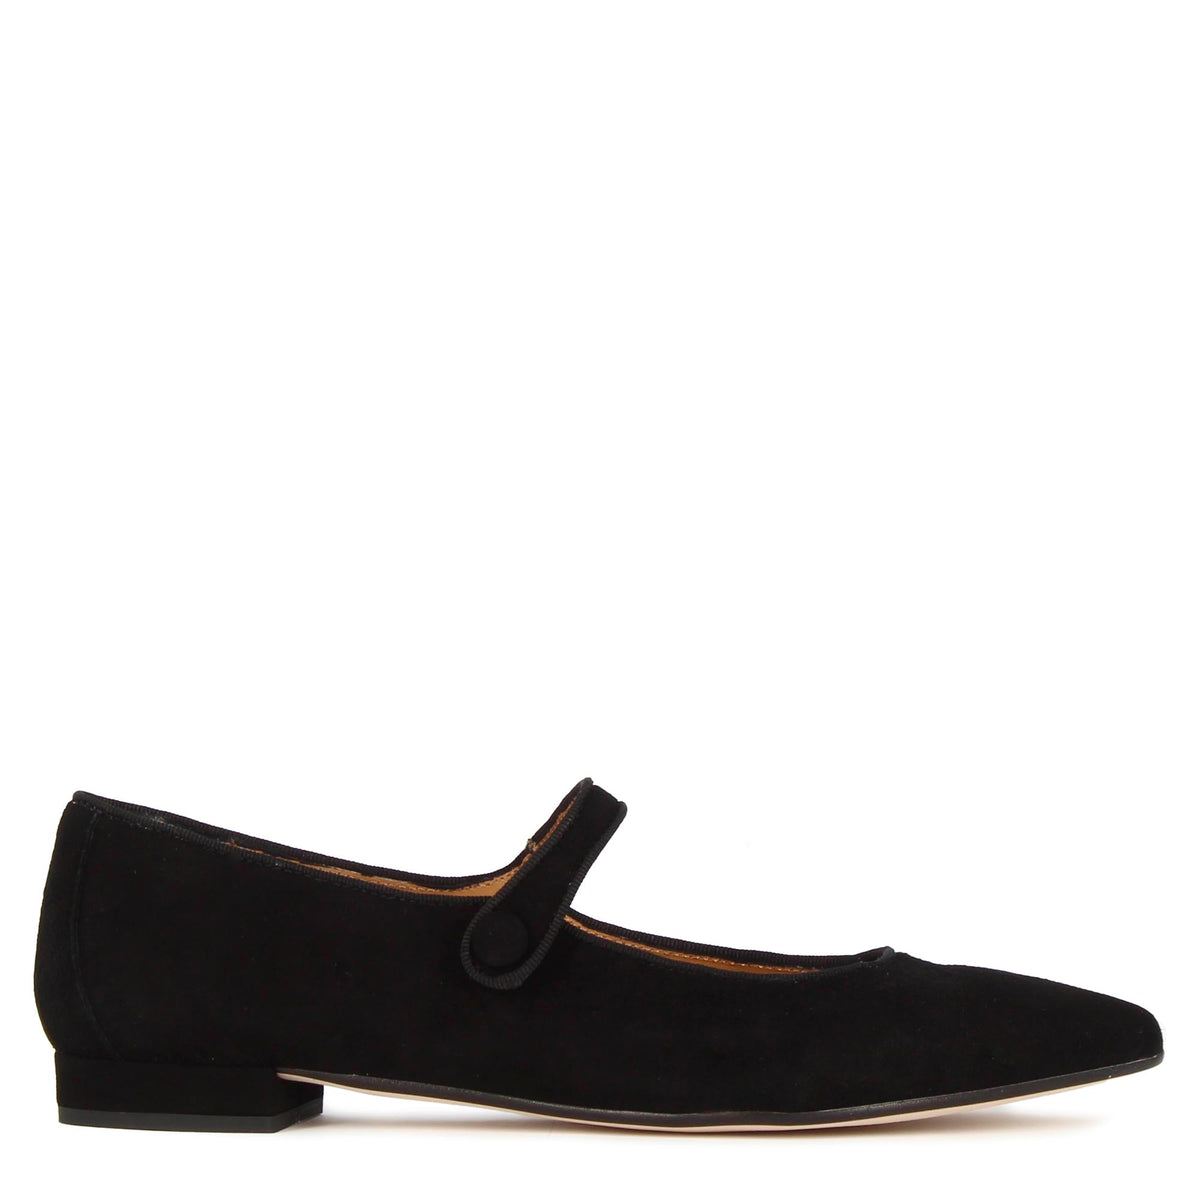 Women's Mary Jane ballerina shoes in suede with black strap